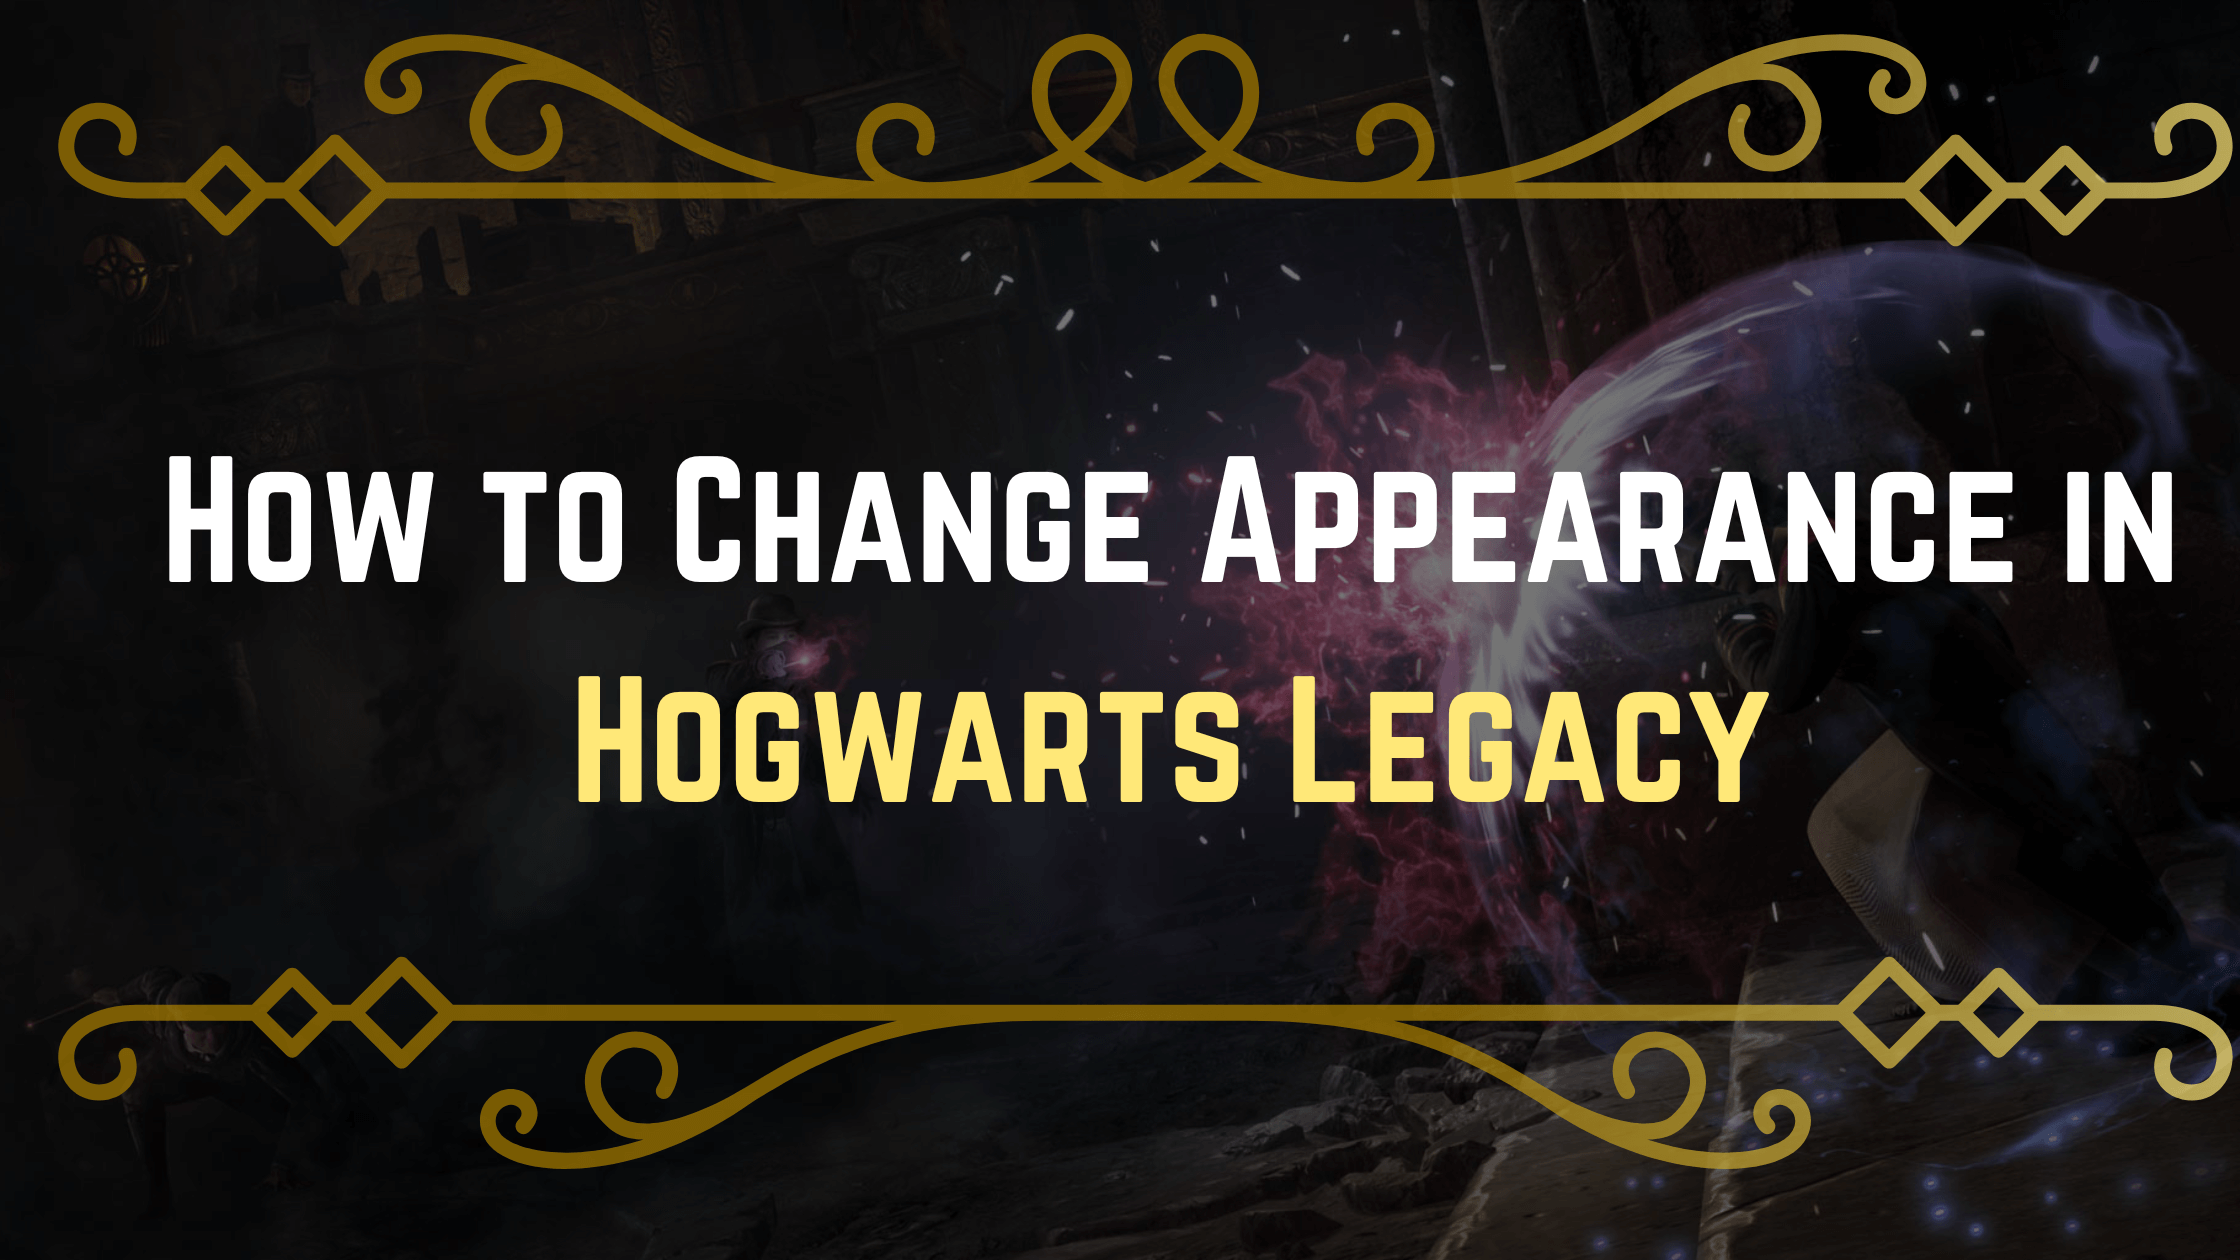 How to Change Appearance in Hogwarts Legacy